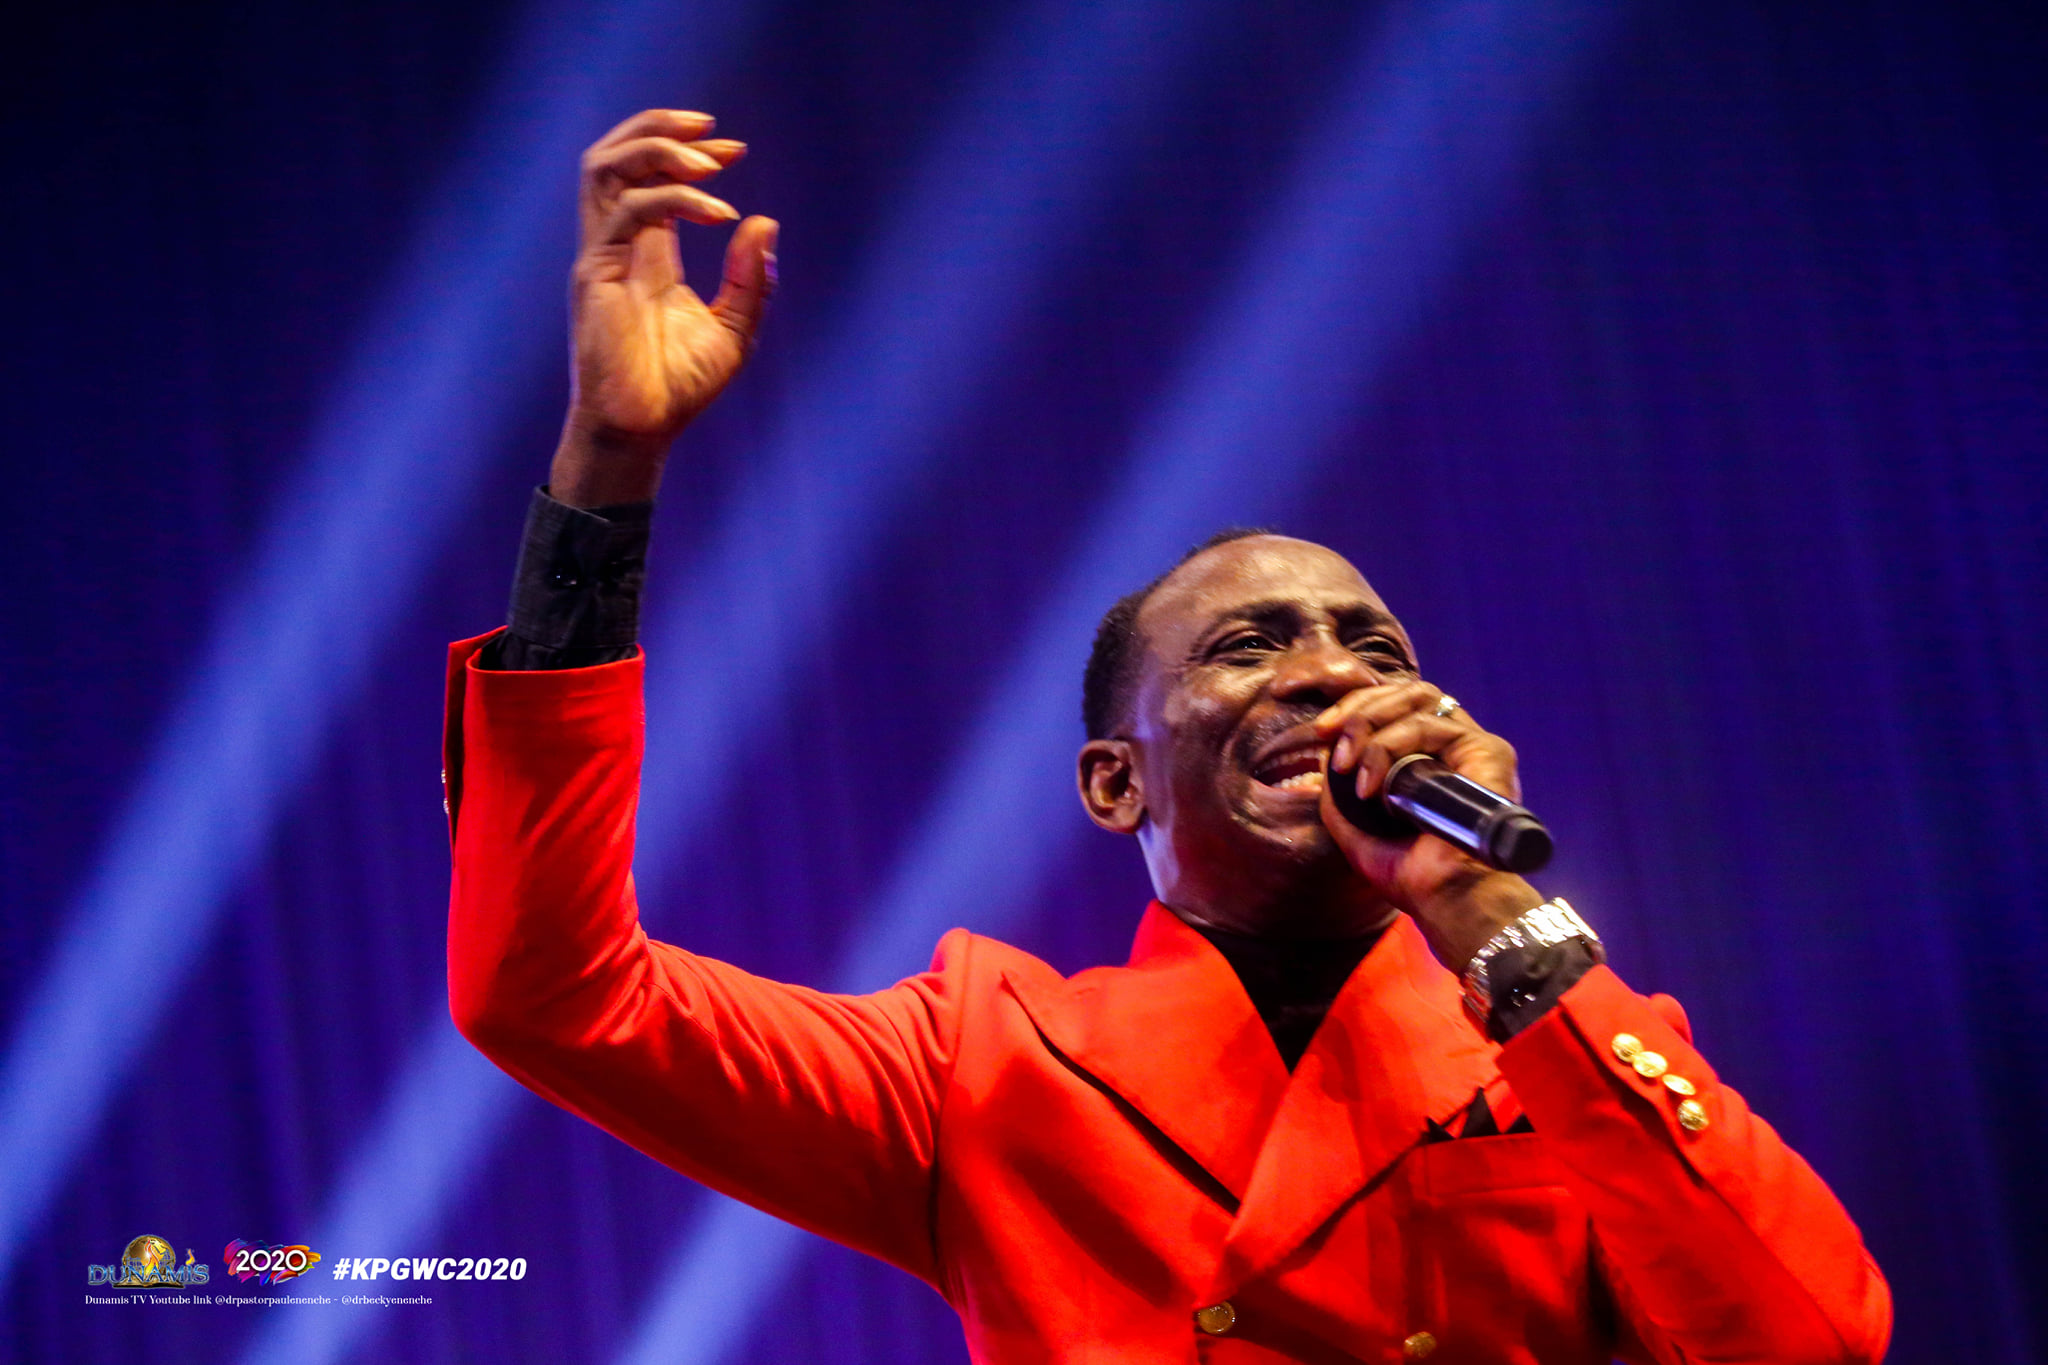 Dr. Paul Enenche Ft Dr. Becky Enenche - Knowing You mp3